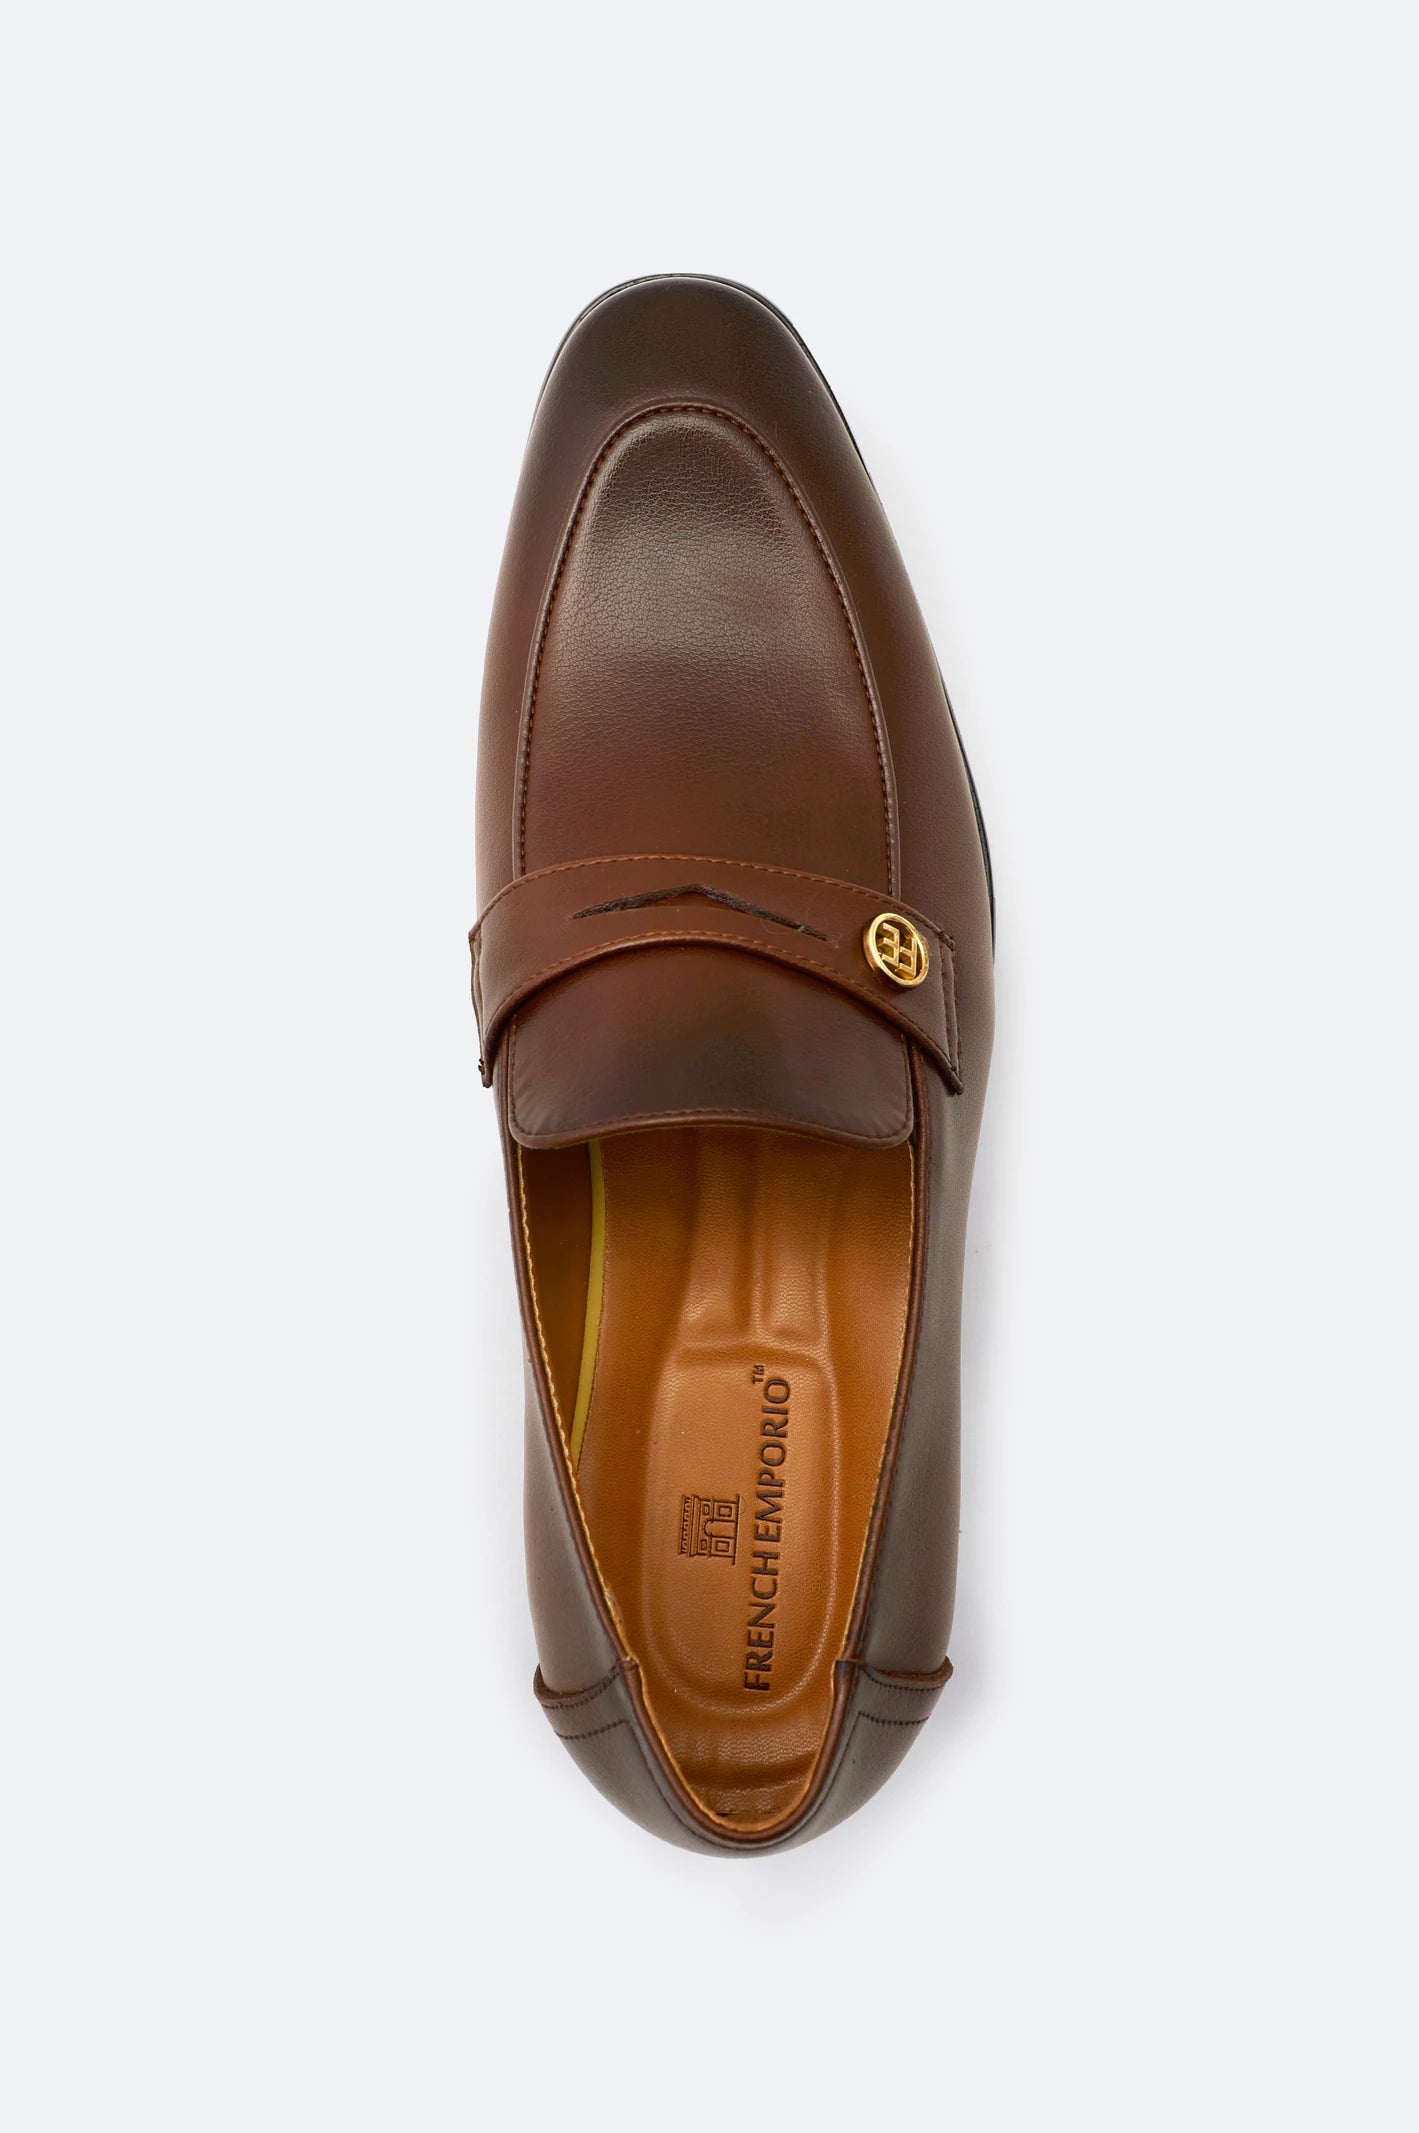 Premium Brown Formal Shoes From Diners